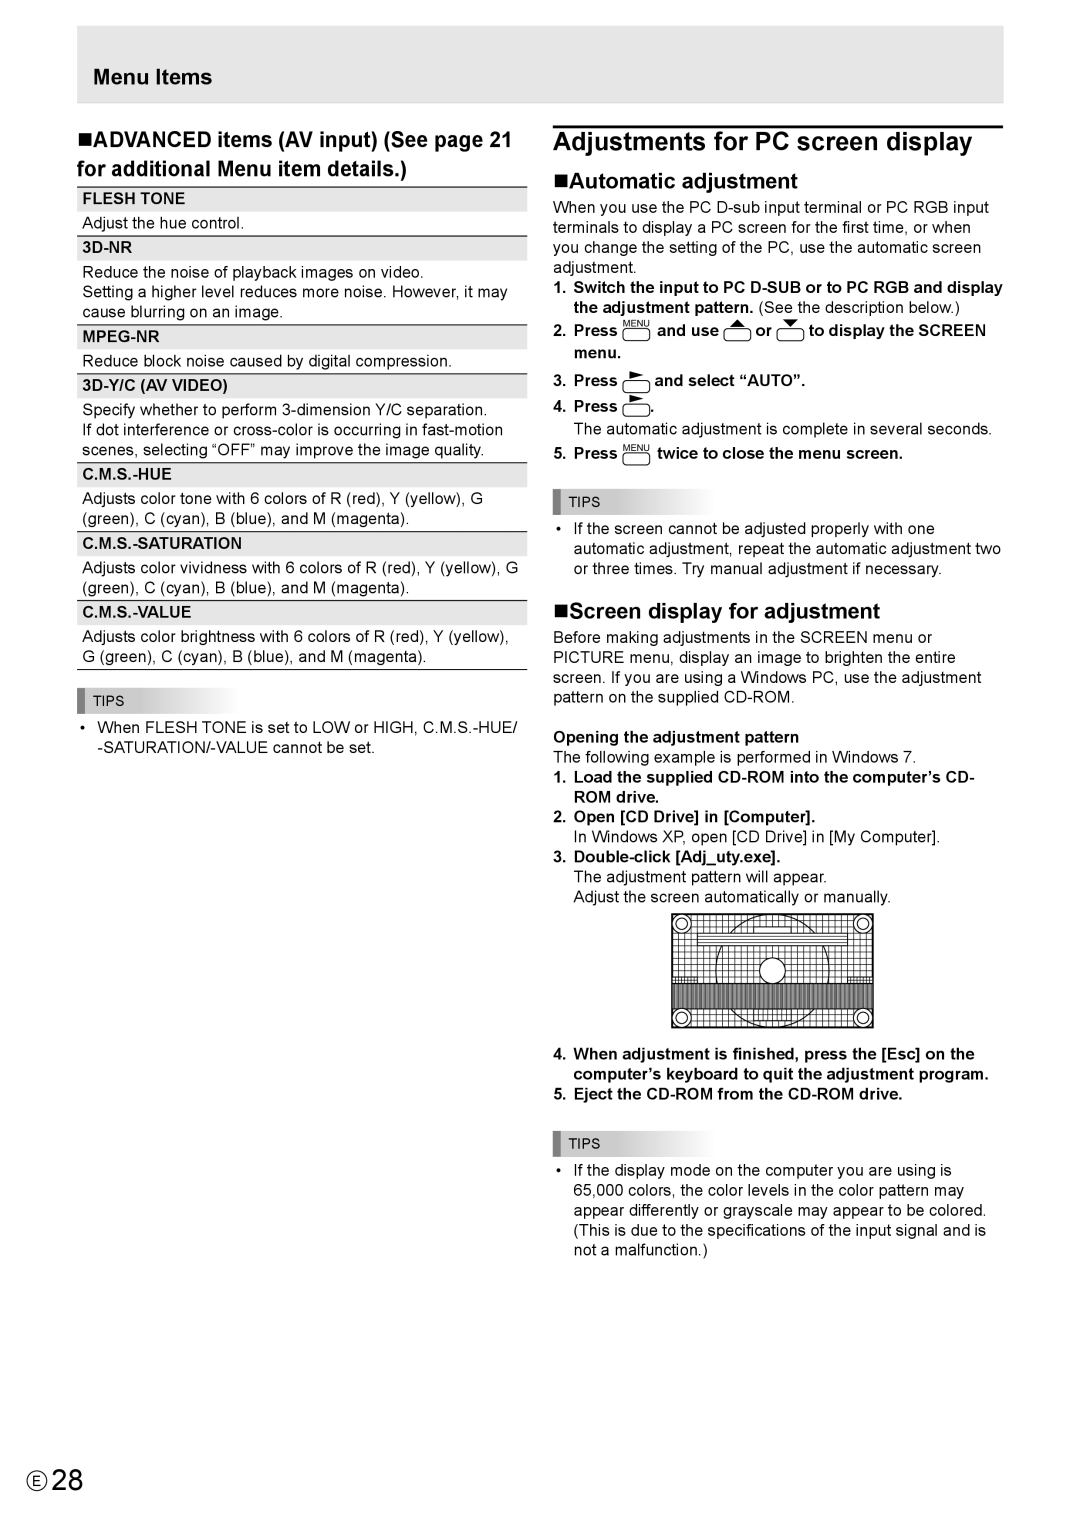 Sharp PN-E602 Adjustments for PC screen display, nADVANCED items AV input See page 21 for additional Menu item details 